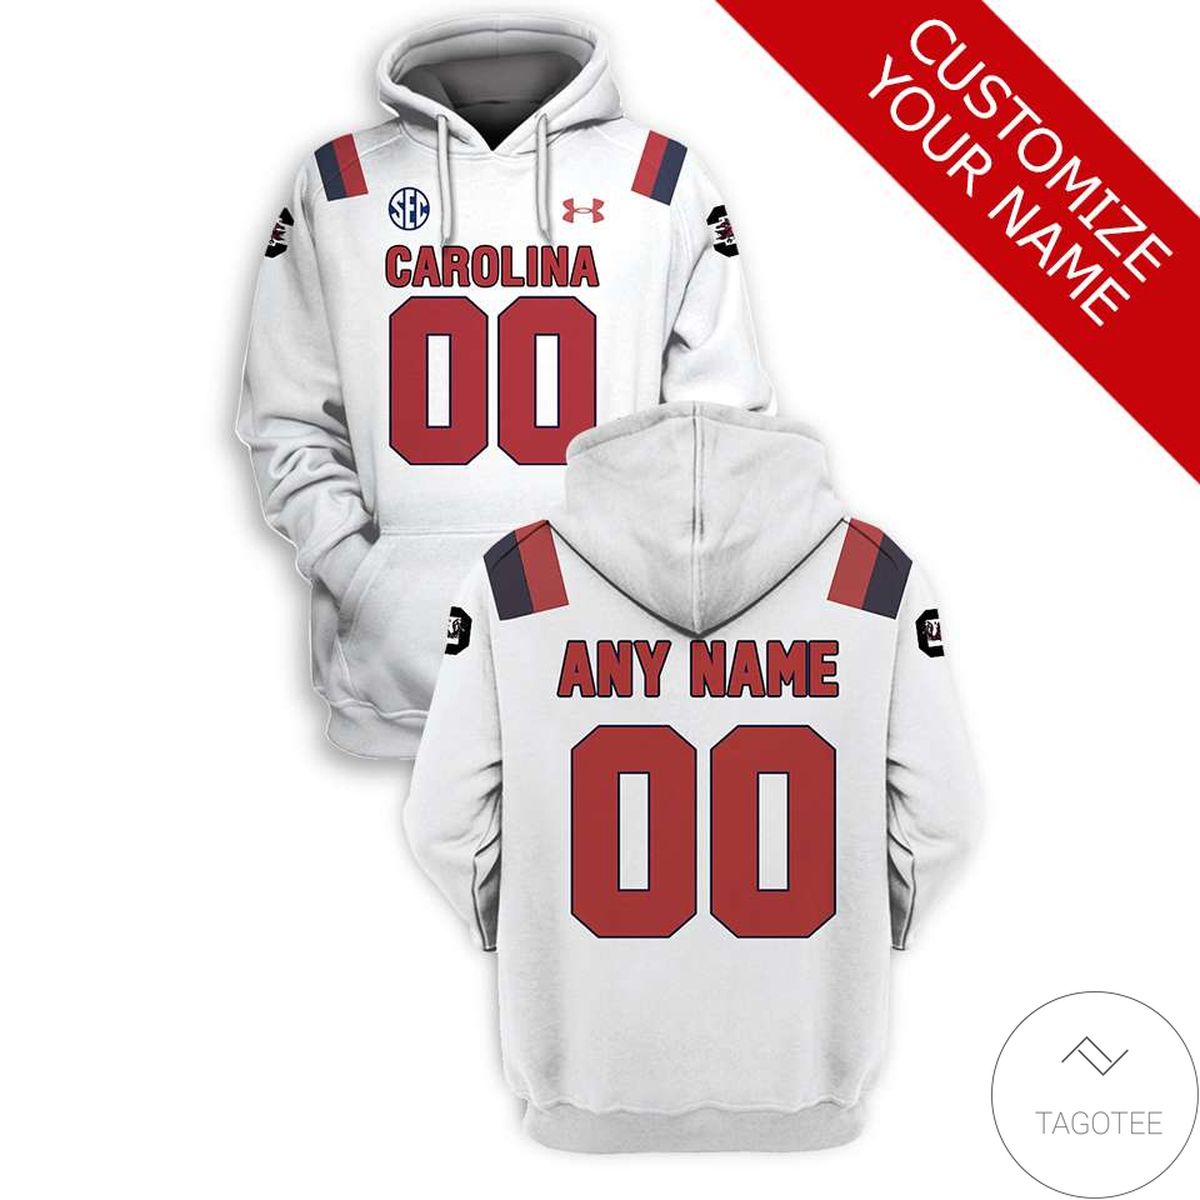 Personalized South Carolina Gamecocks Branded Team Unisex 3d Hoodie